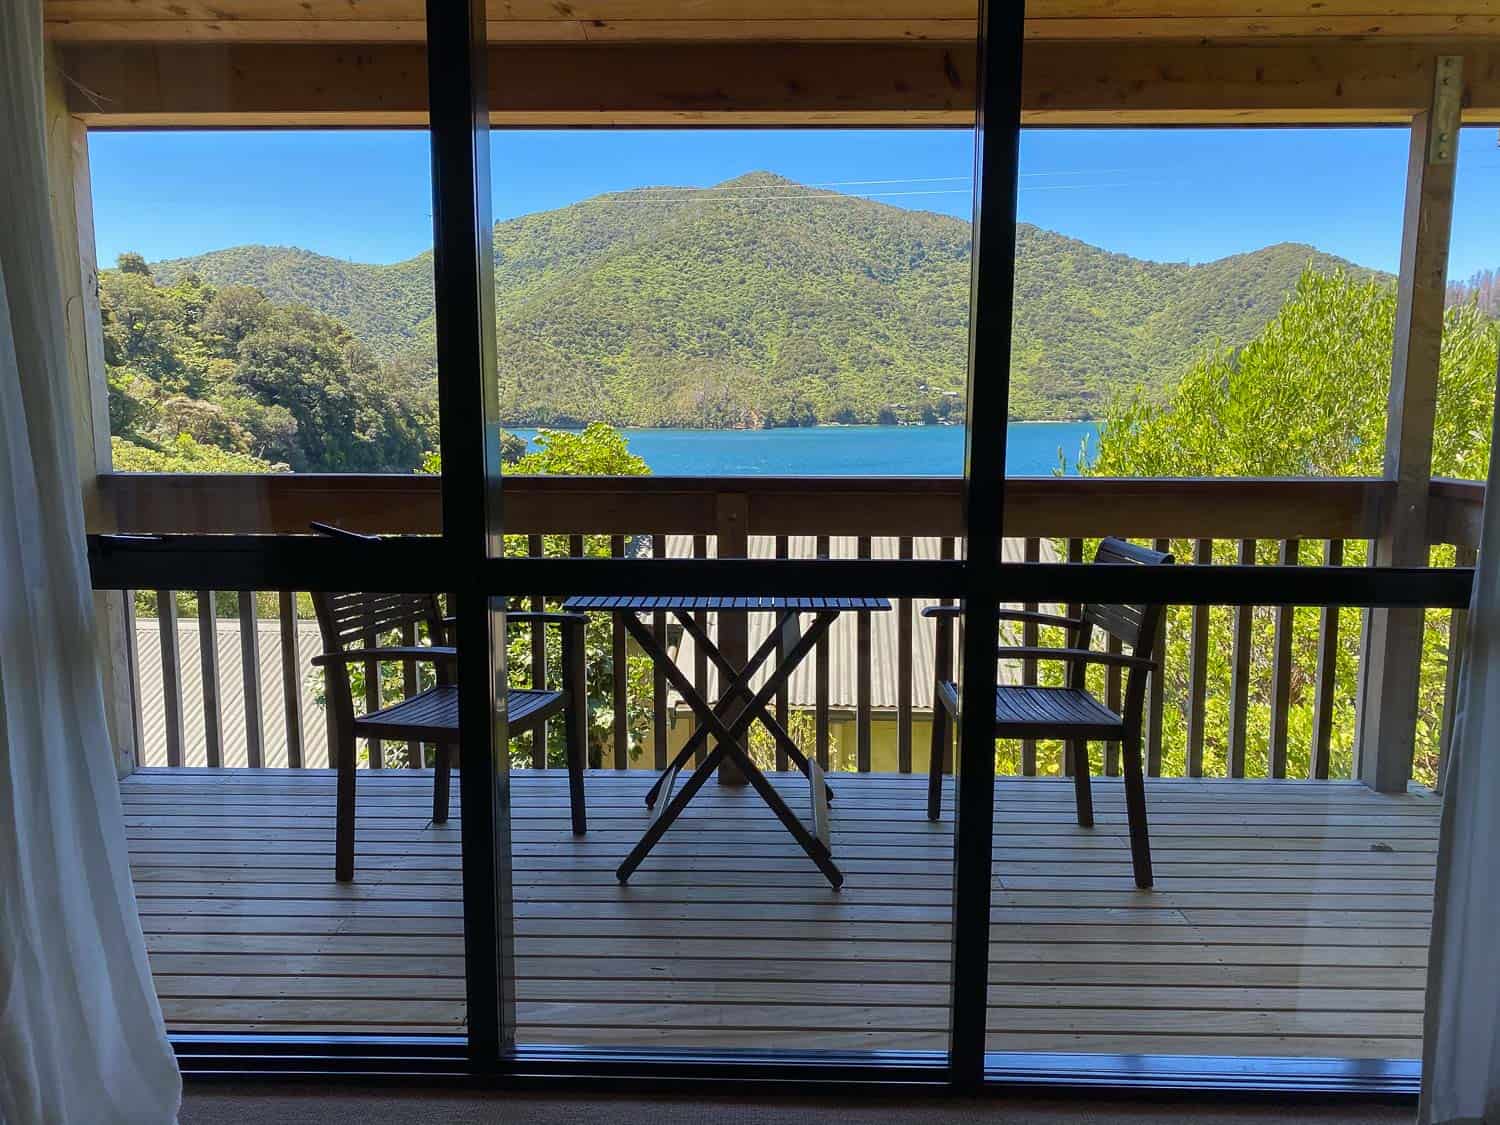 The sea view from the balcony of the Kakariki Chalet at Lochmara Lodge in the Marlbrough Sounds